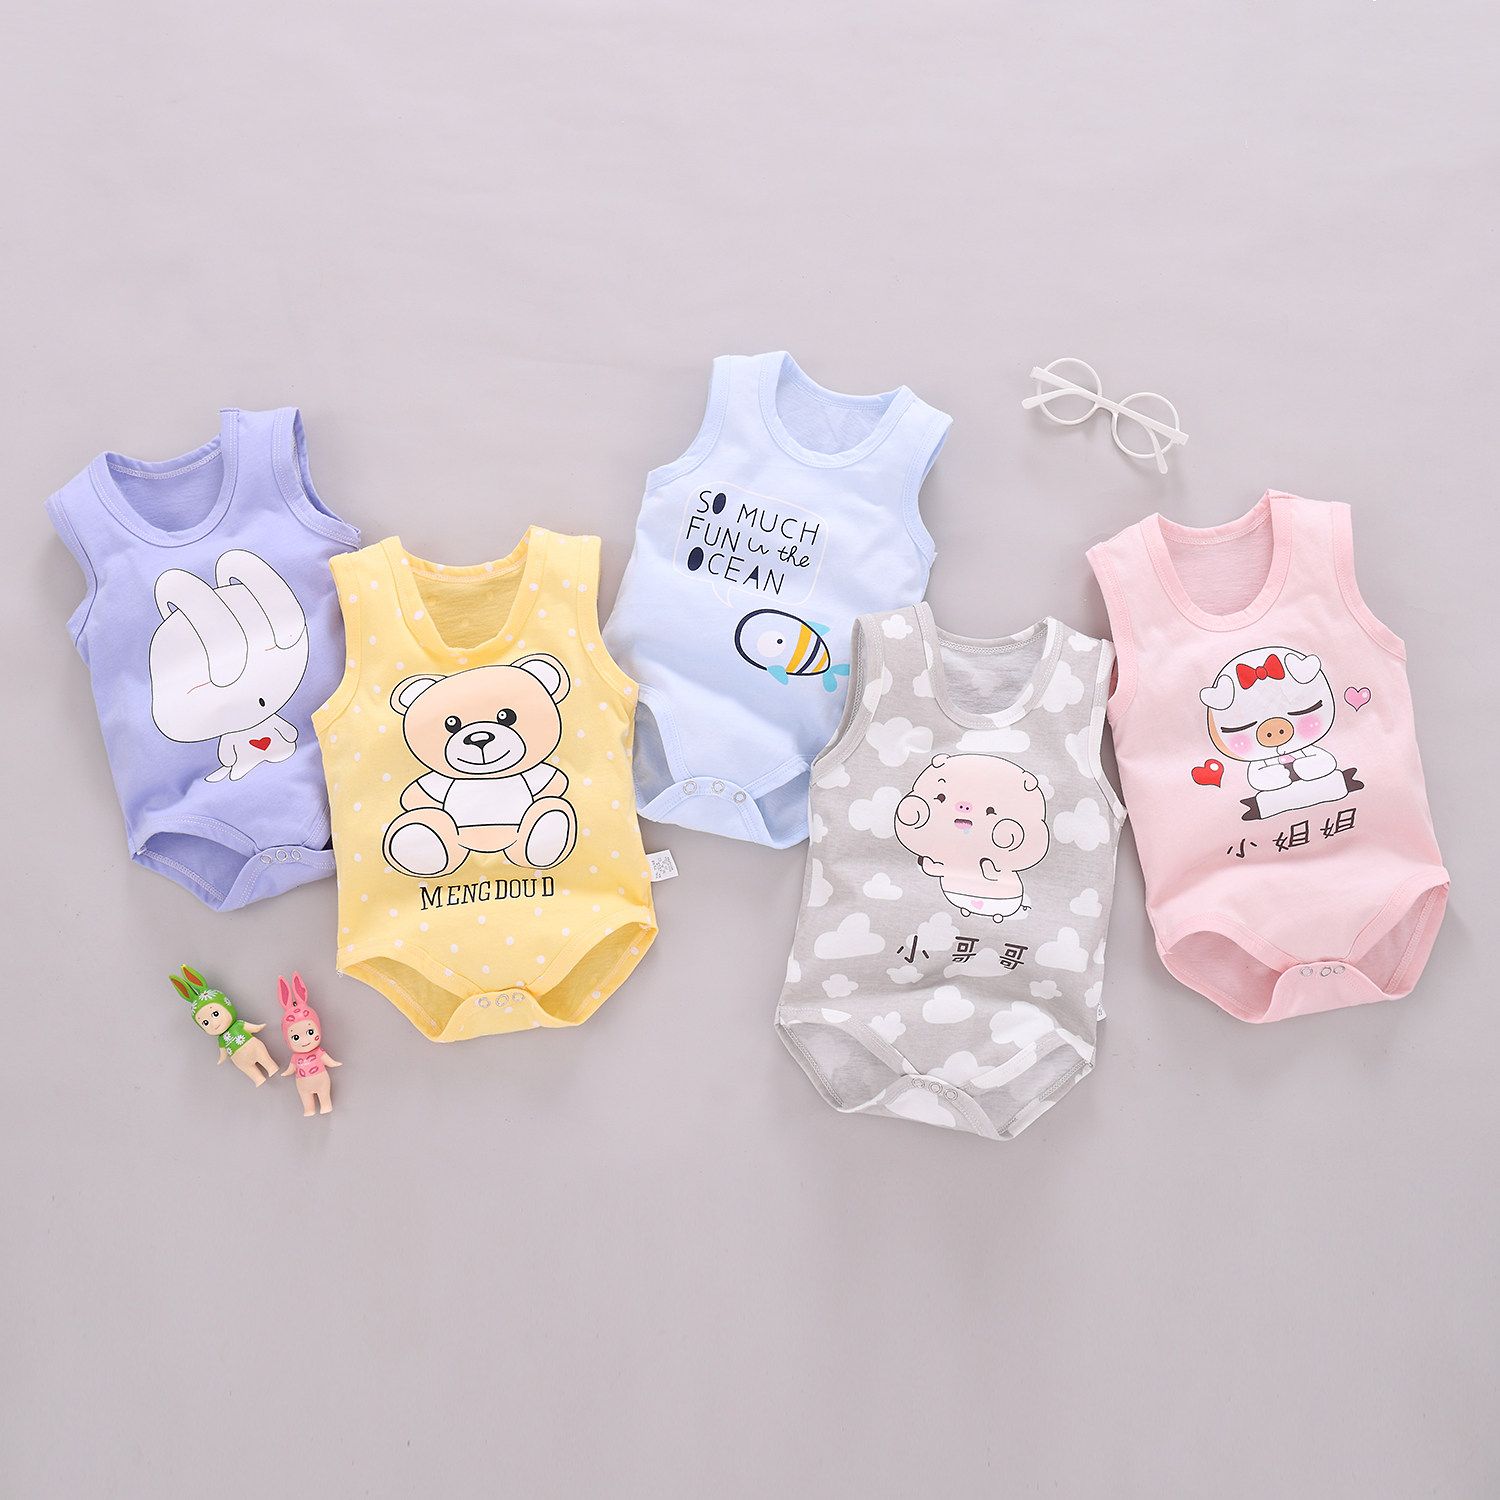 Baby's clothes spring and summer thin sleeveless hatsuit bag fart garment creeper baby summer Jumpsuit pajamas